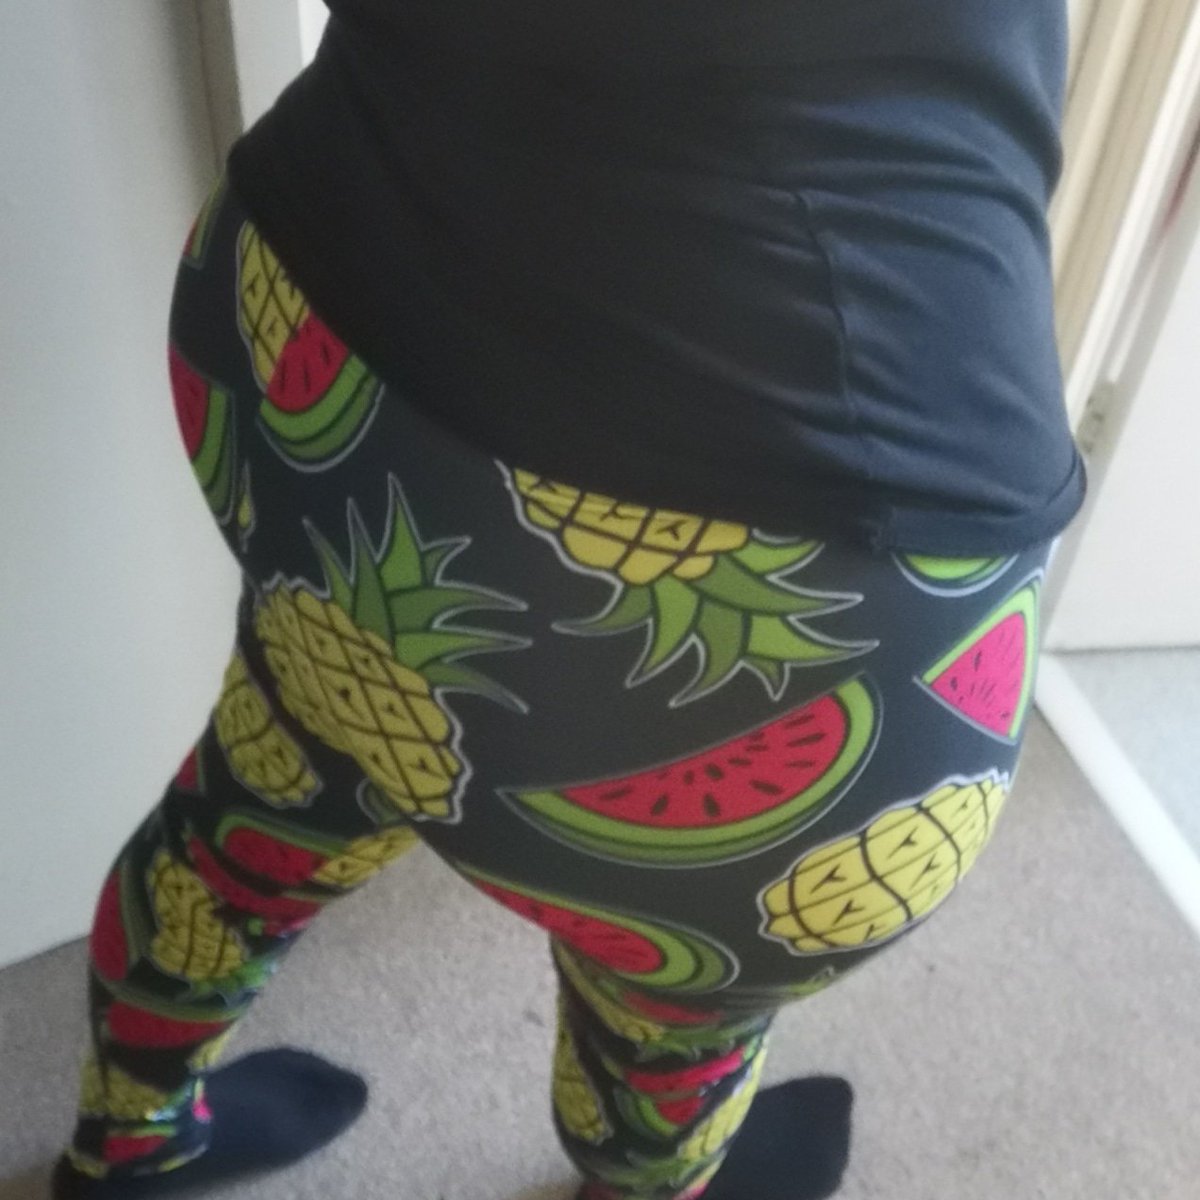 Loving the new prints from @locketloves click my link to browse and shop the latest unique #activewear
lucylocketloves.grsm.io/CarolImpey
#leggings #fashion #fitness #curvyandfit #fitmums #colour #color #booty #bootylicious